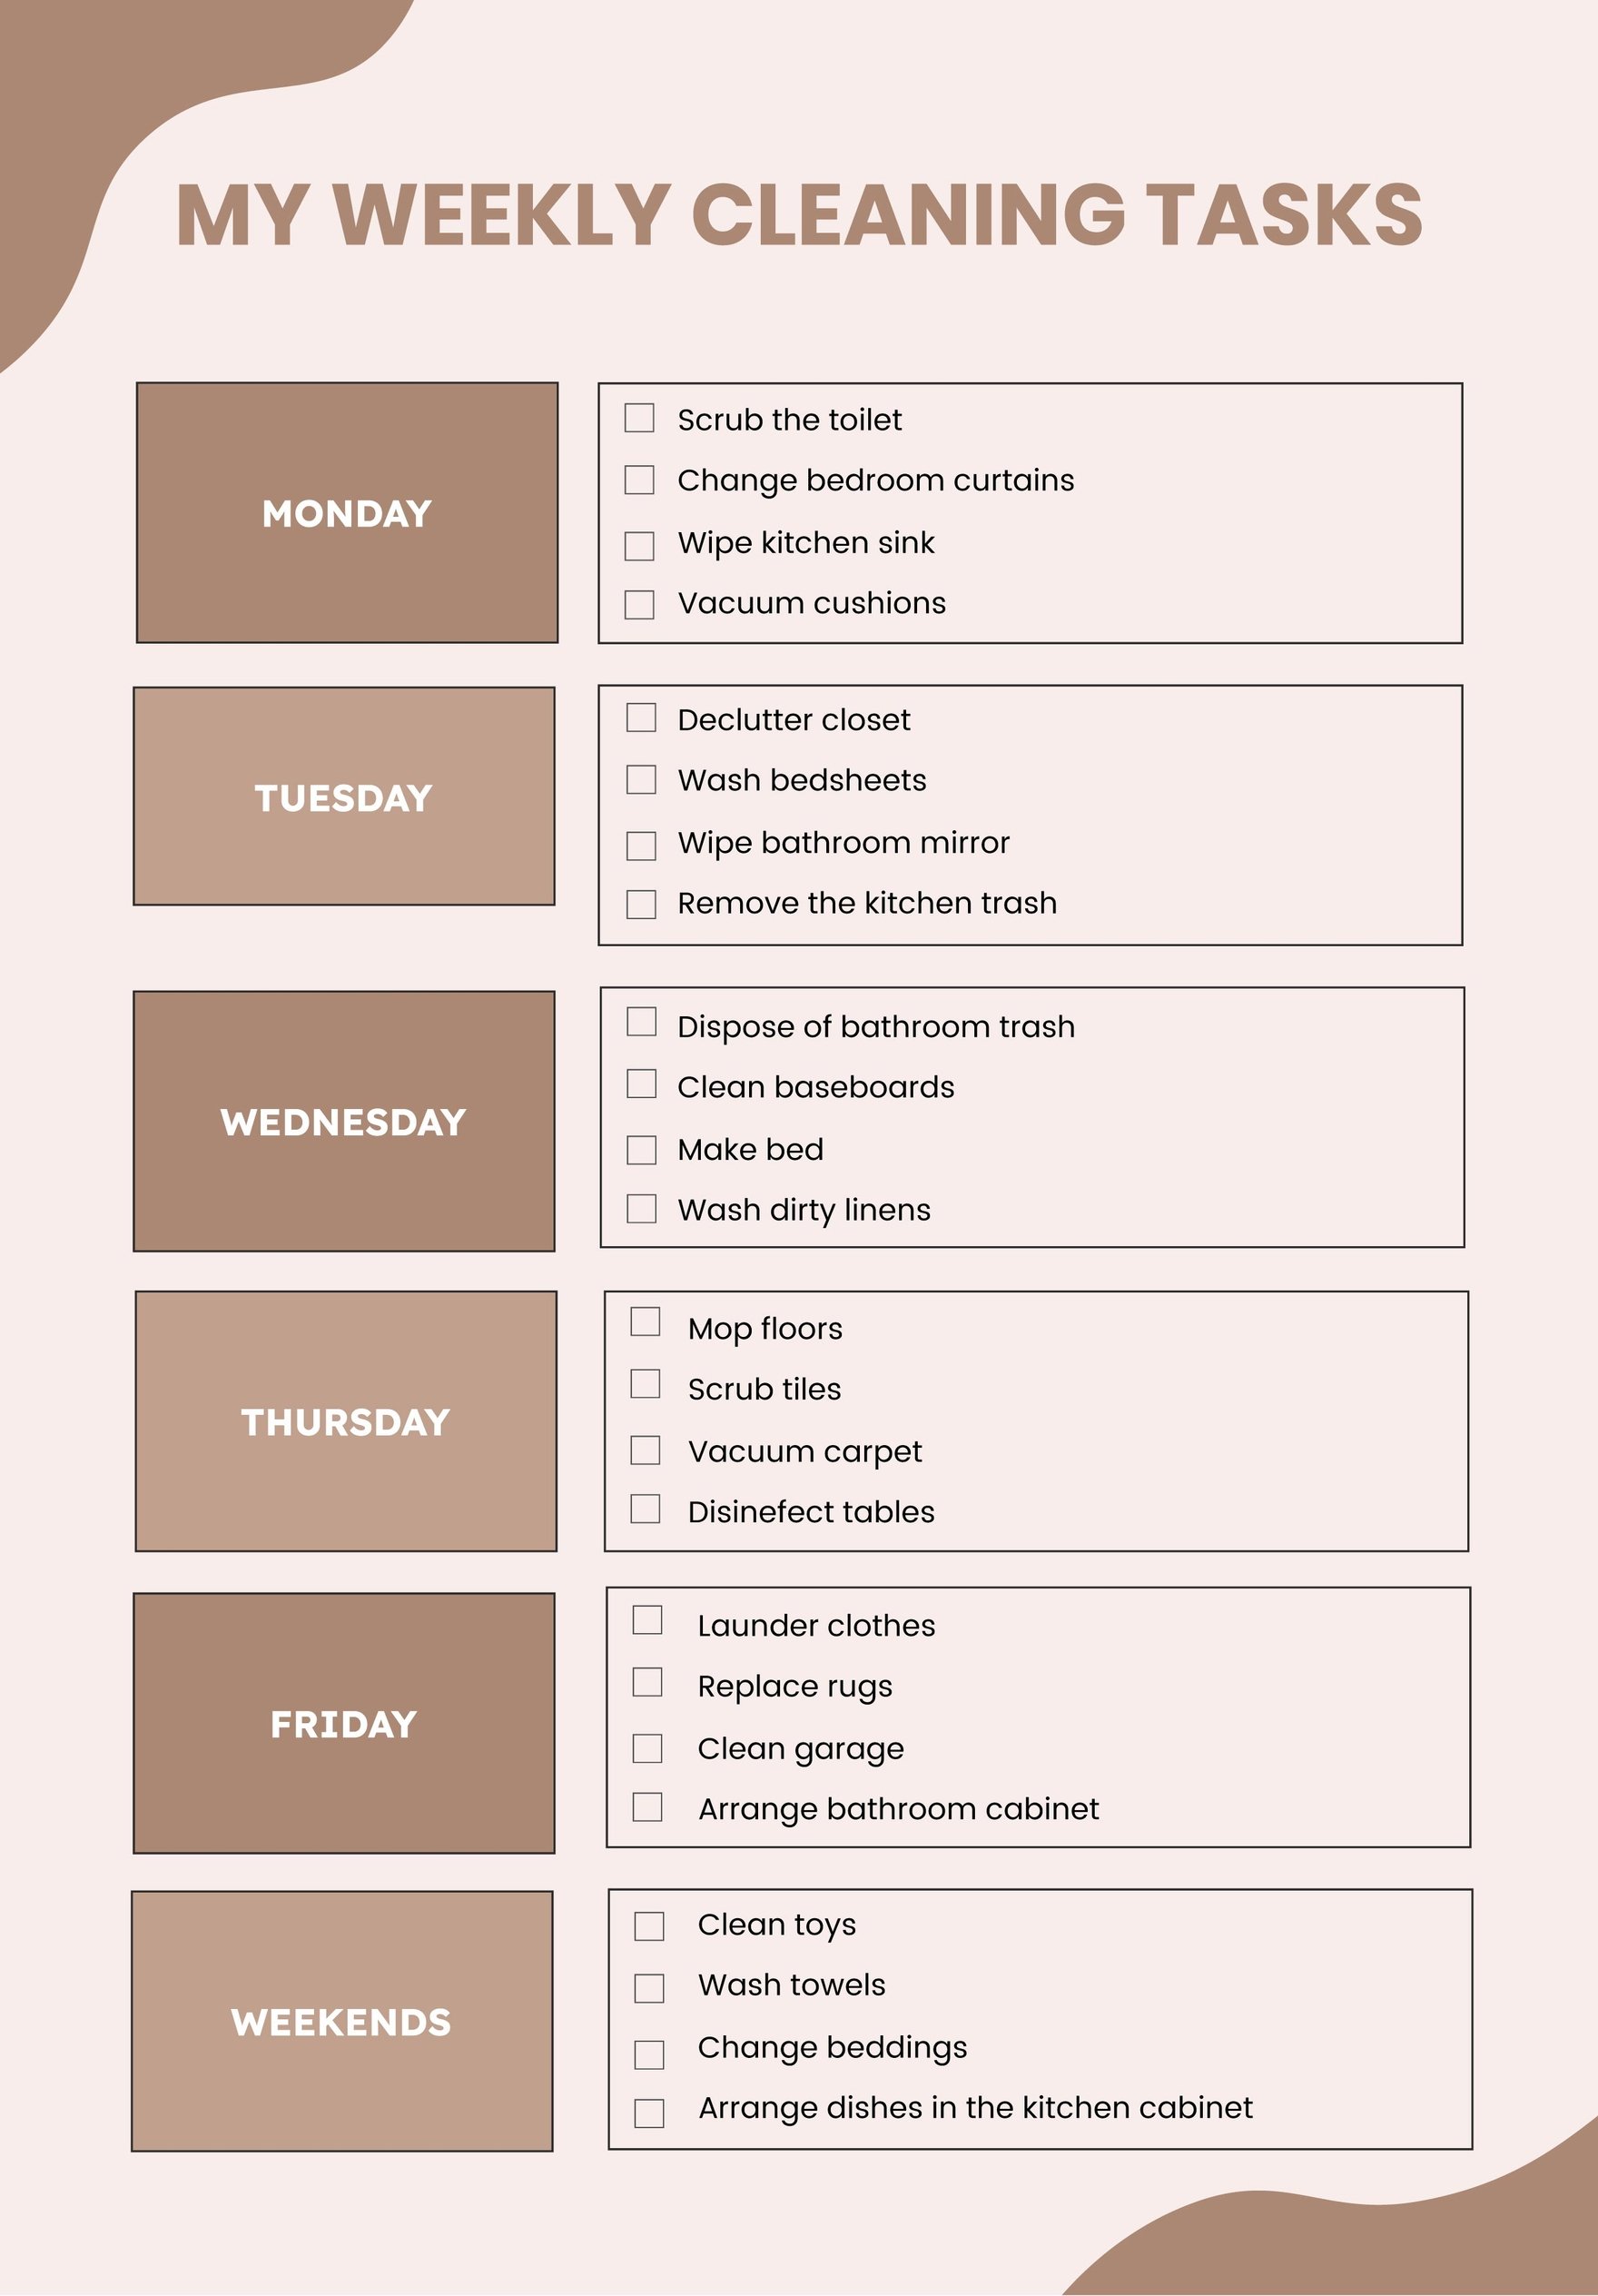 Weekly Cleaning Chart in PDF, Illustrator